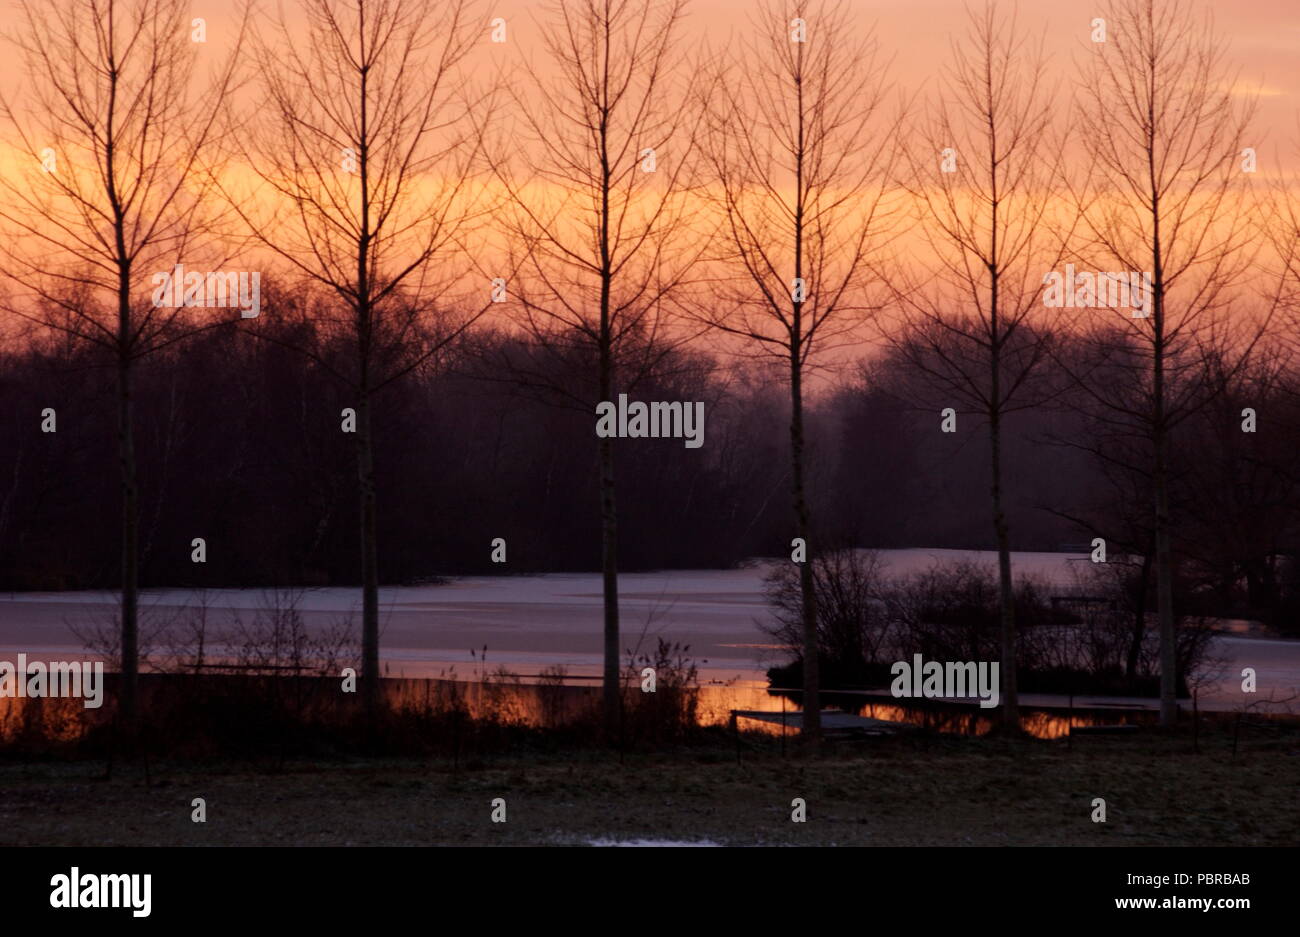 AJAXNETPHOTO. VAUX SUR SOMME, FRANCE. - WOODED BANKS OF THE RIVER SOMME AT SUNSET.  PHOTO:JONATHAN EASTLAND/AJAX REF:D1X0601 3183 Stock Photo